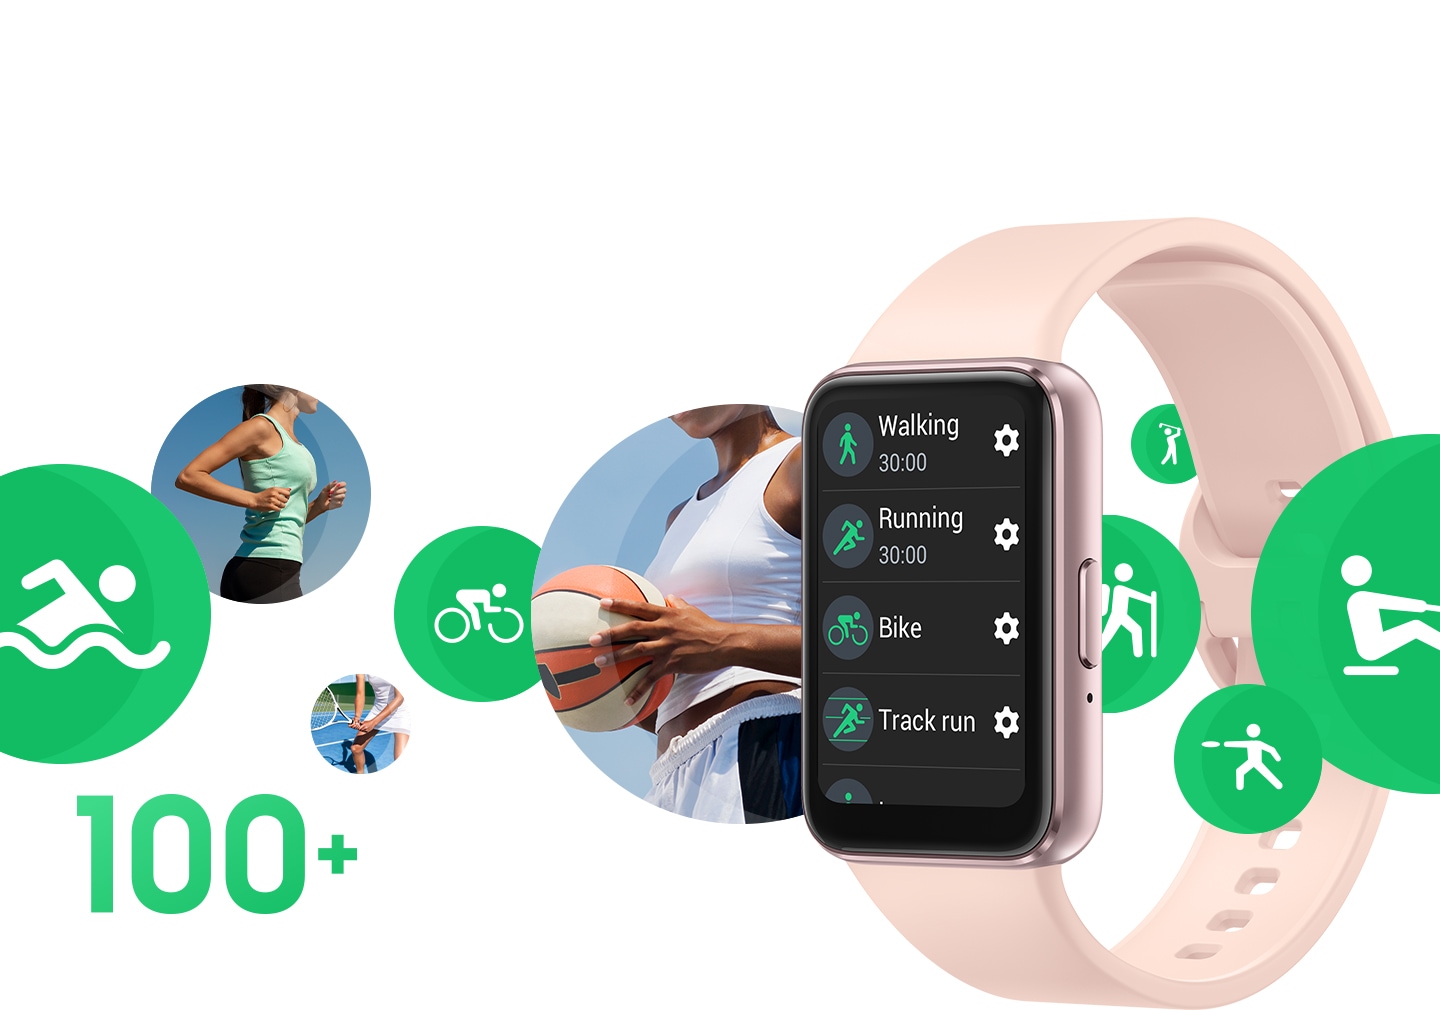 Galaxy Fit3 with multiple workout mode icons, including bike and pool swim, gliding across the device.